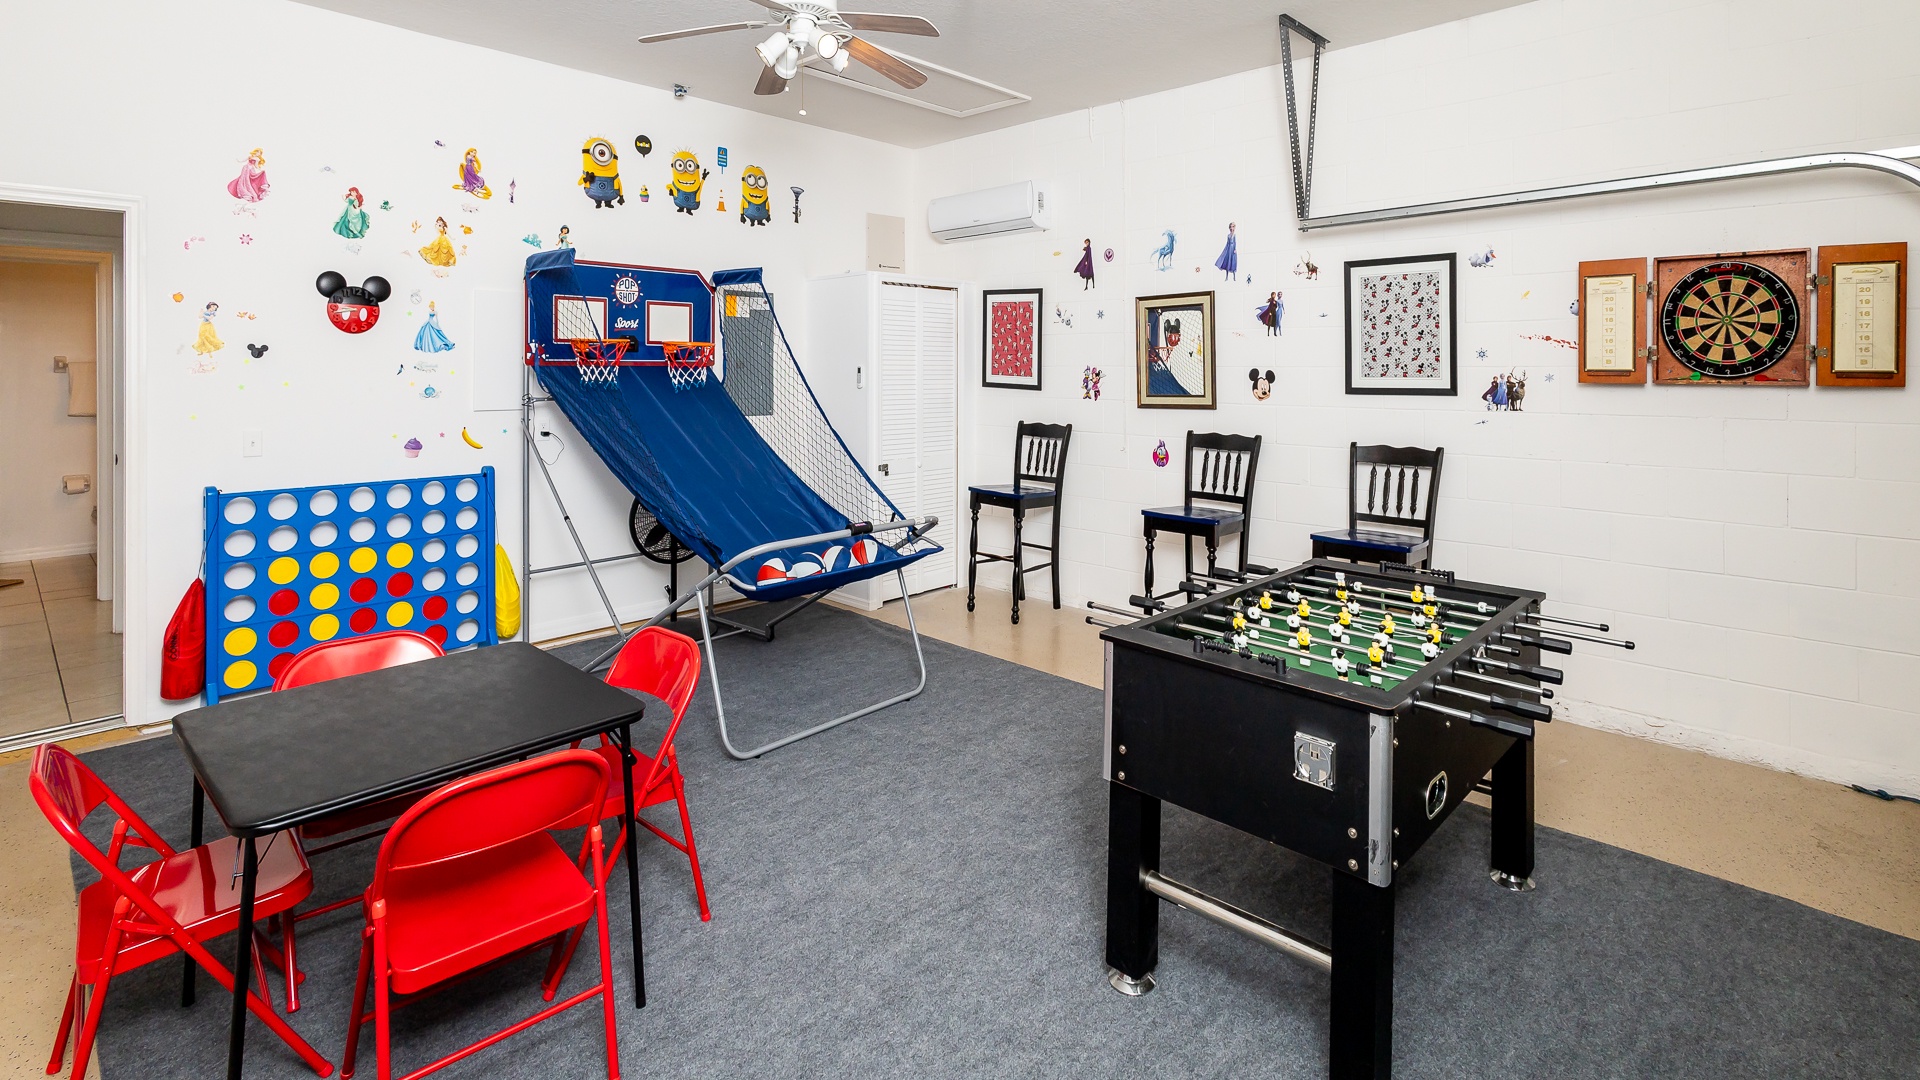 Game room with foosball table, dart board, life size connect 4, and more